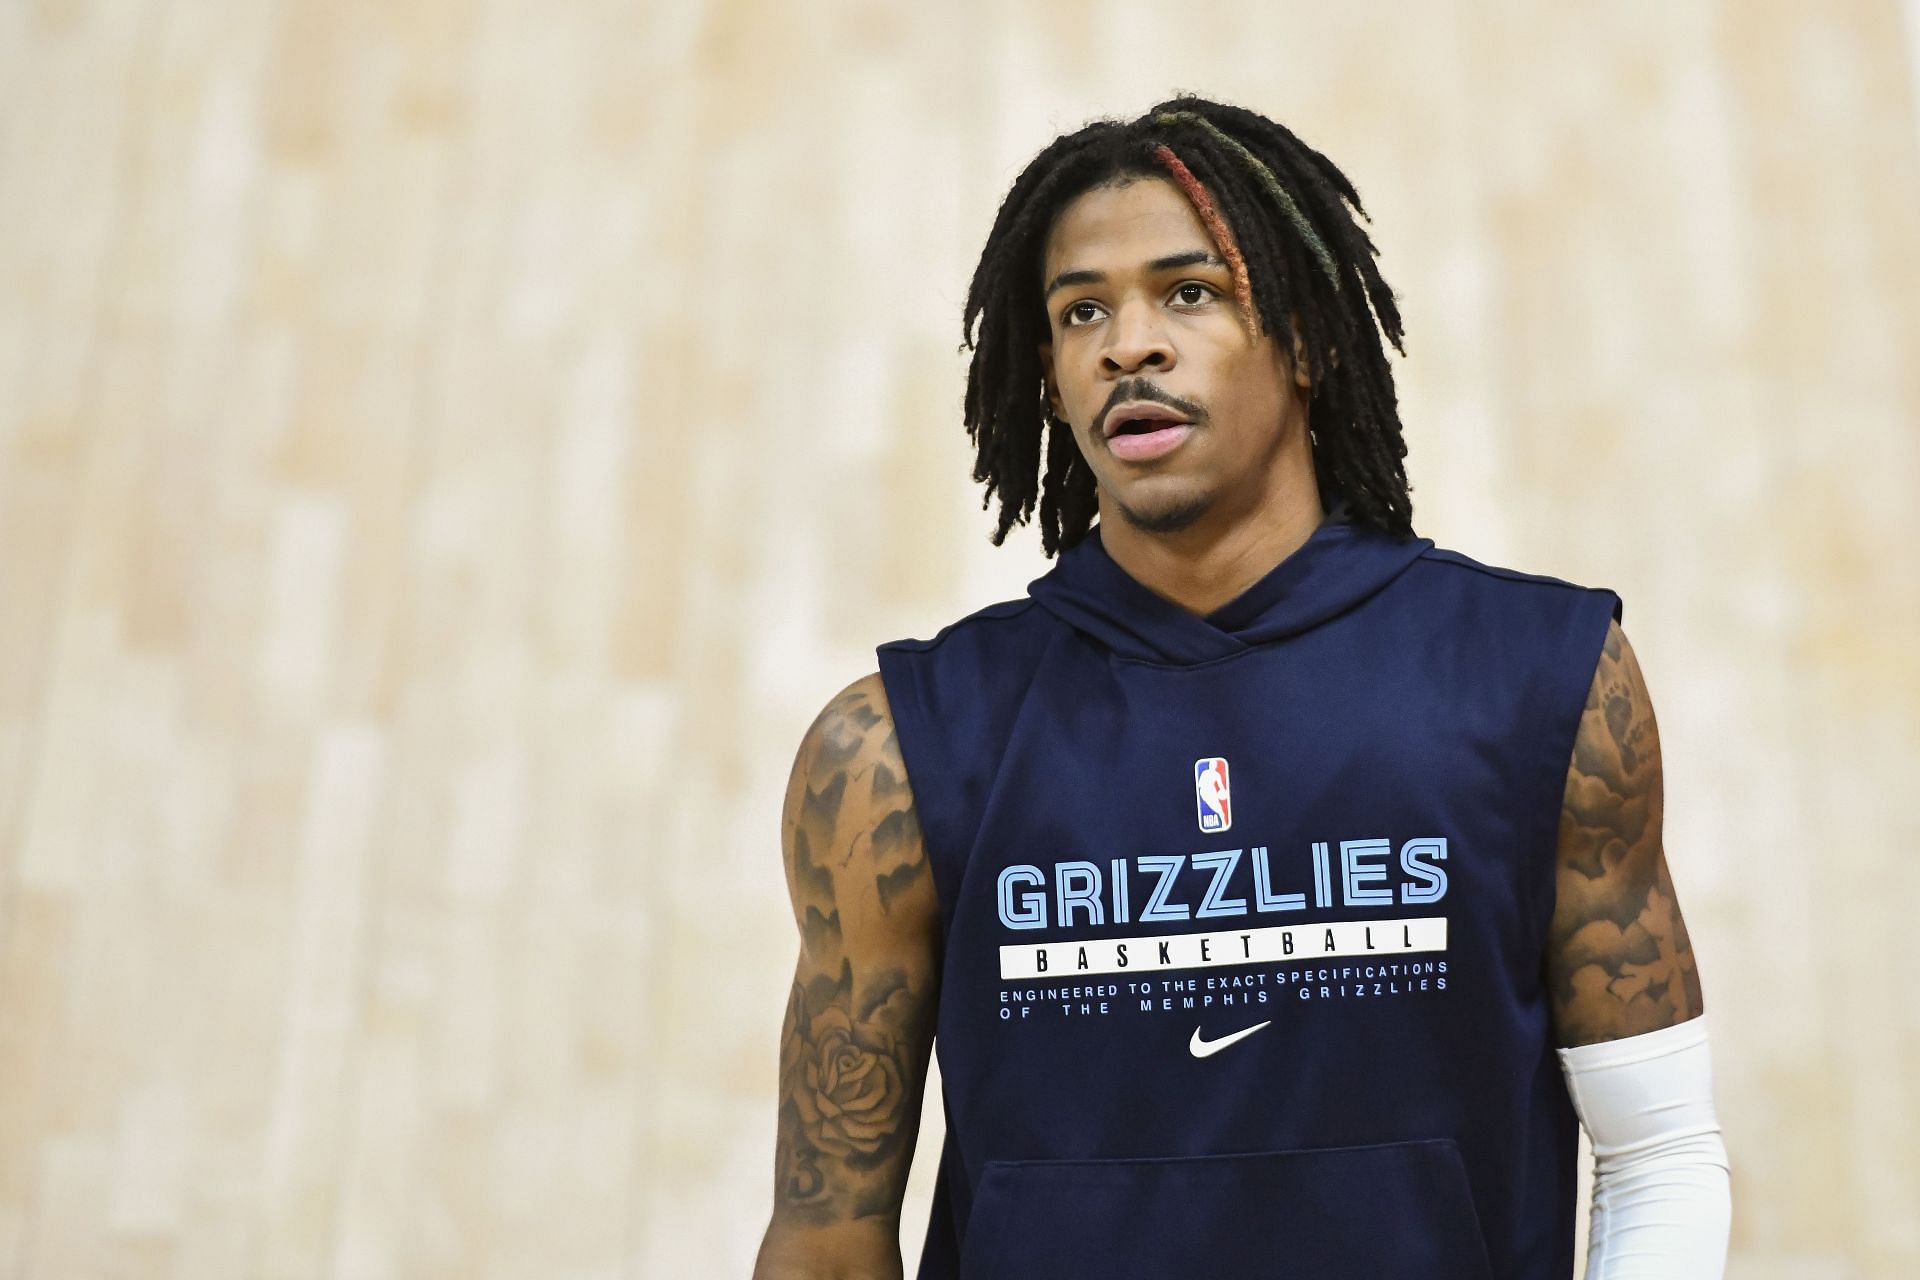 Ja Morant of the Memphis Grizzlies in the 2021 NBA playoffs